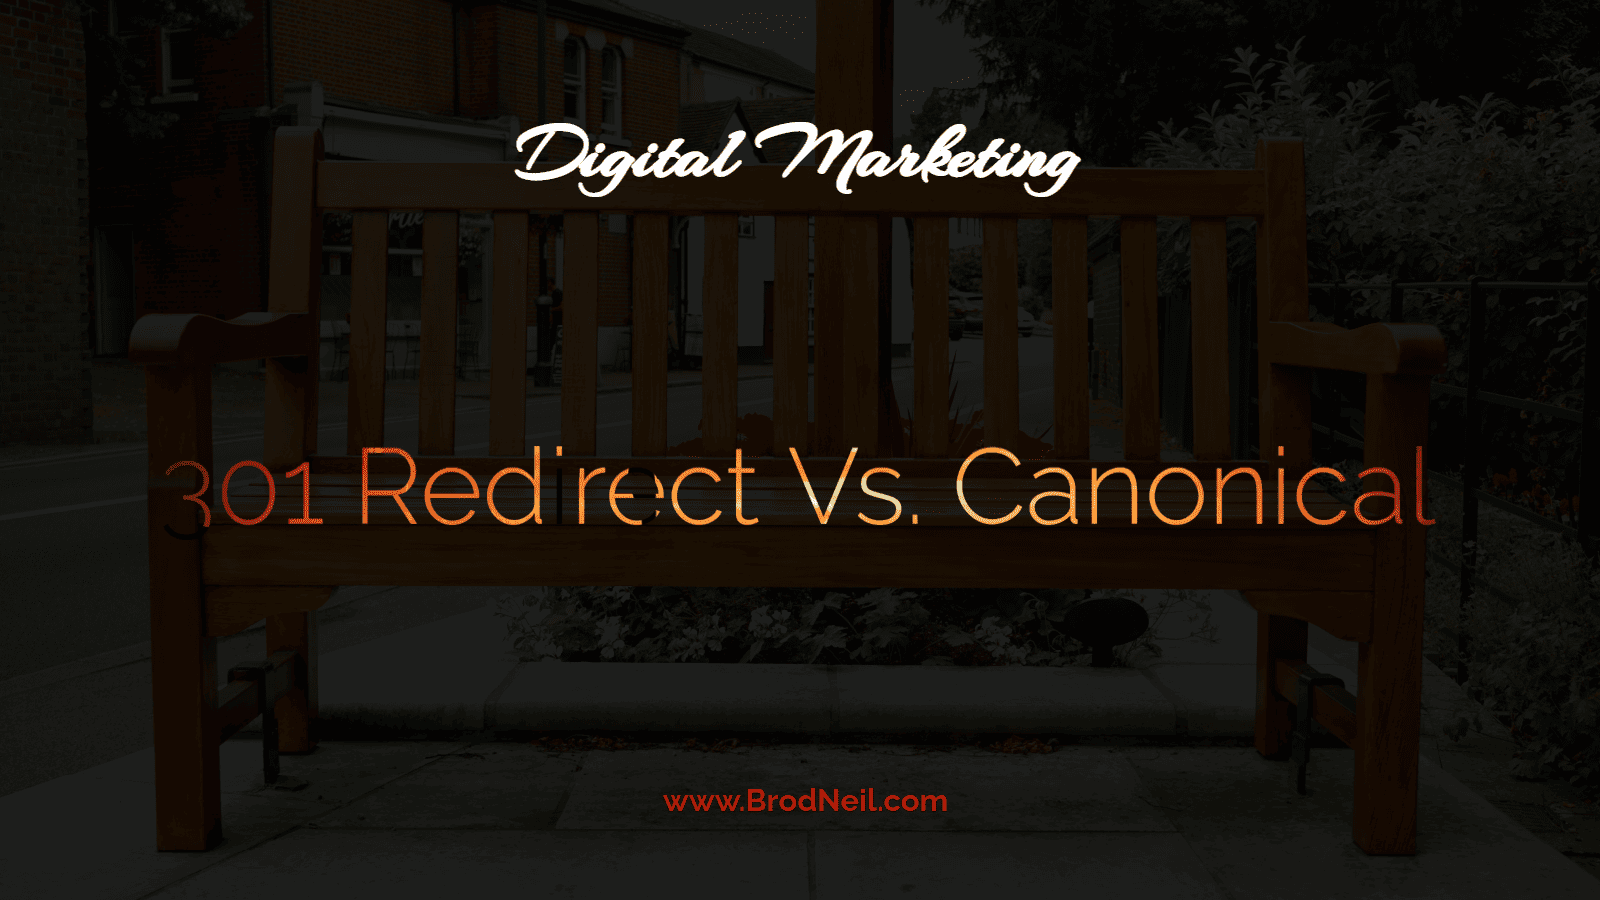 301 Redirect Vs. Canonical